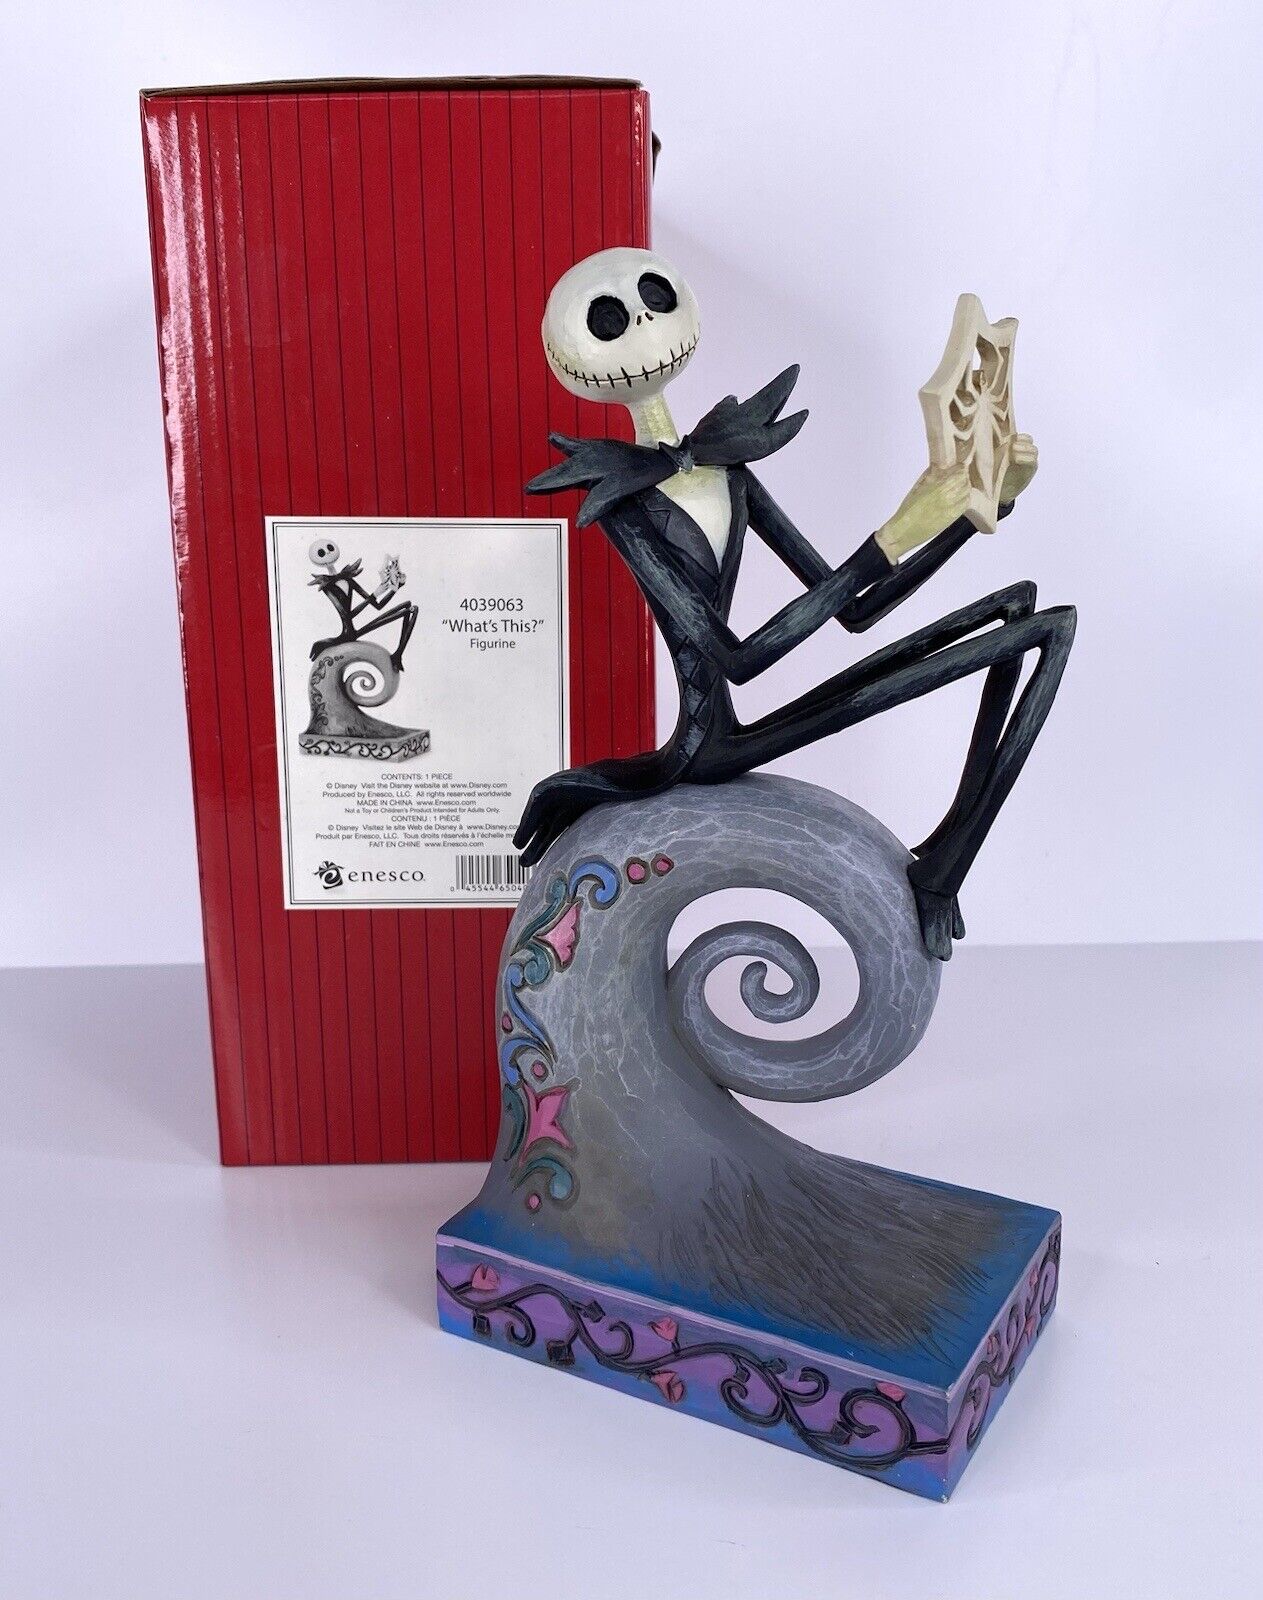 Disney Traditions What's This Jack Skellington Figure Nightmare Before Christmas